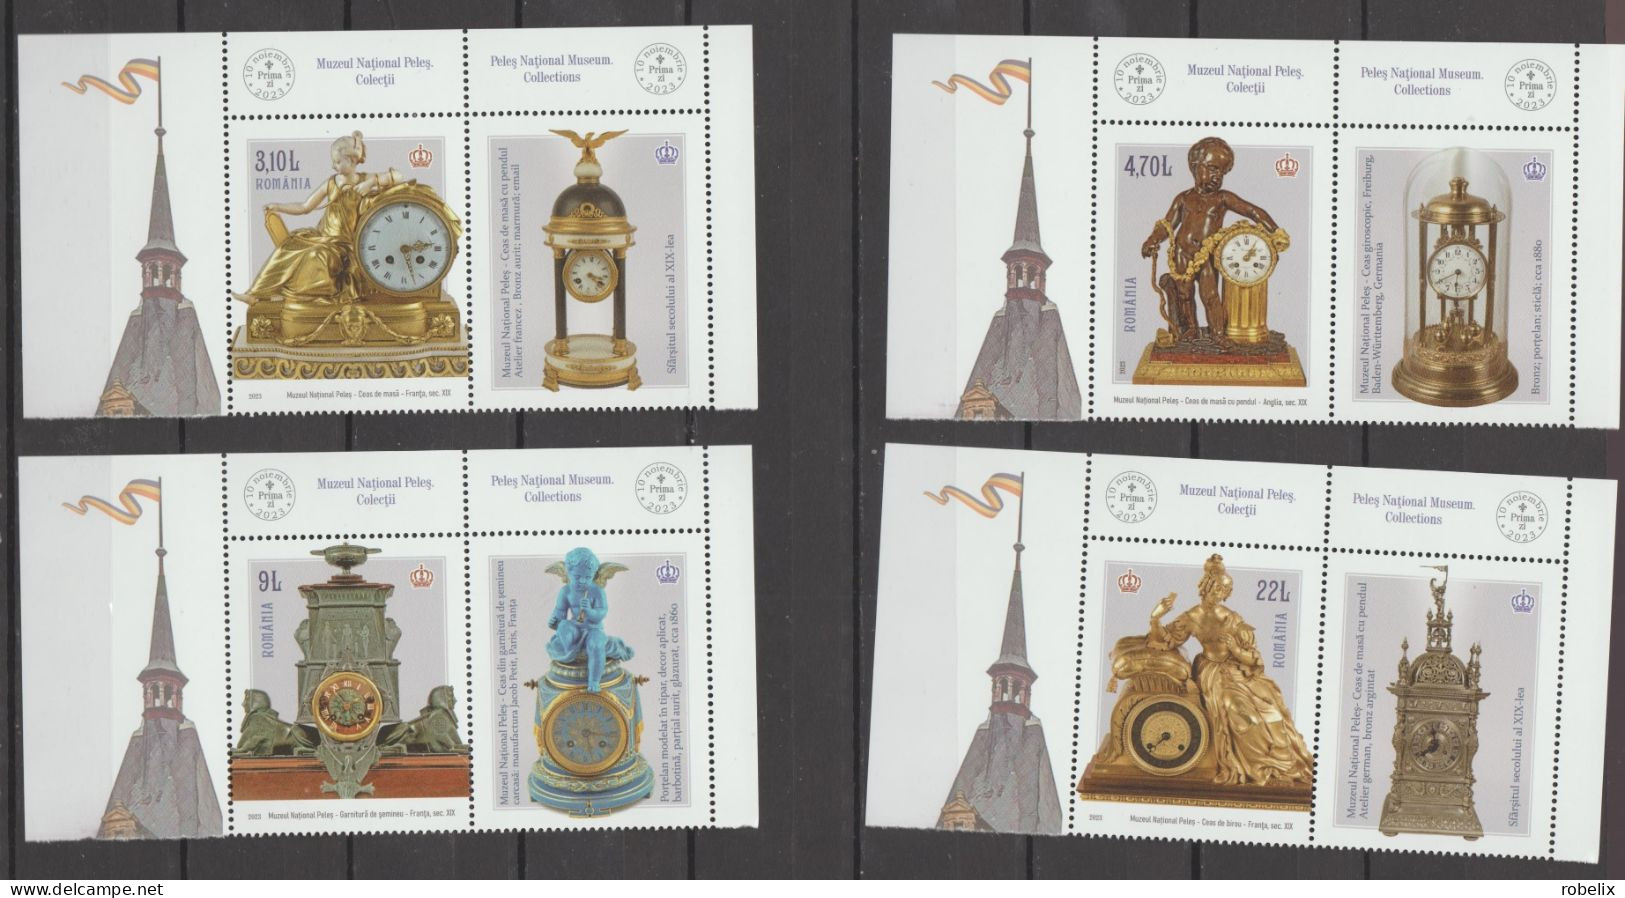 ROMANIA 2023  PELEȘ NATIONAL MUSEUM - COLLECTIONS - CLOCKS  Set Of 4 Stamps With Labels  MNH** - Relojería